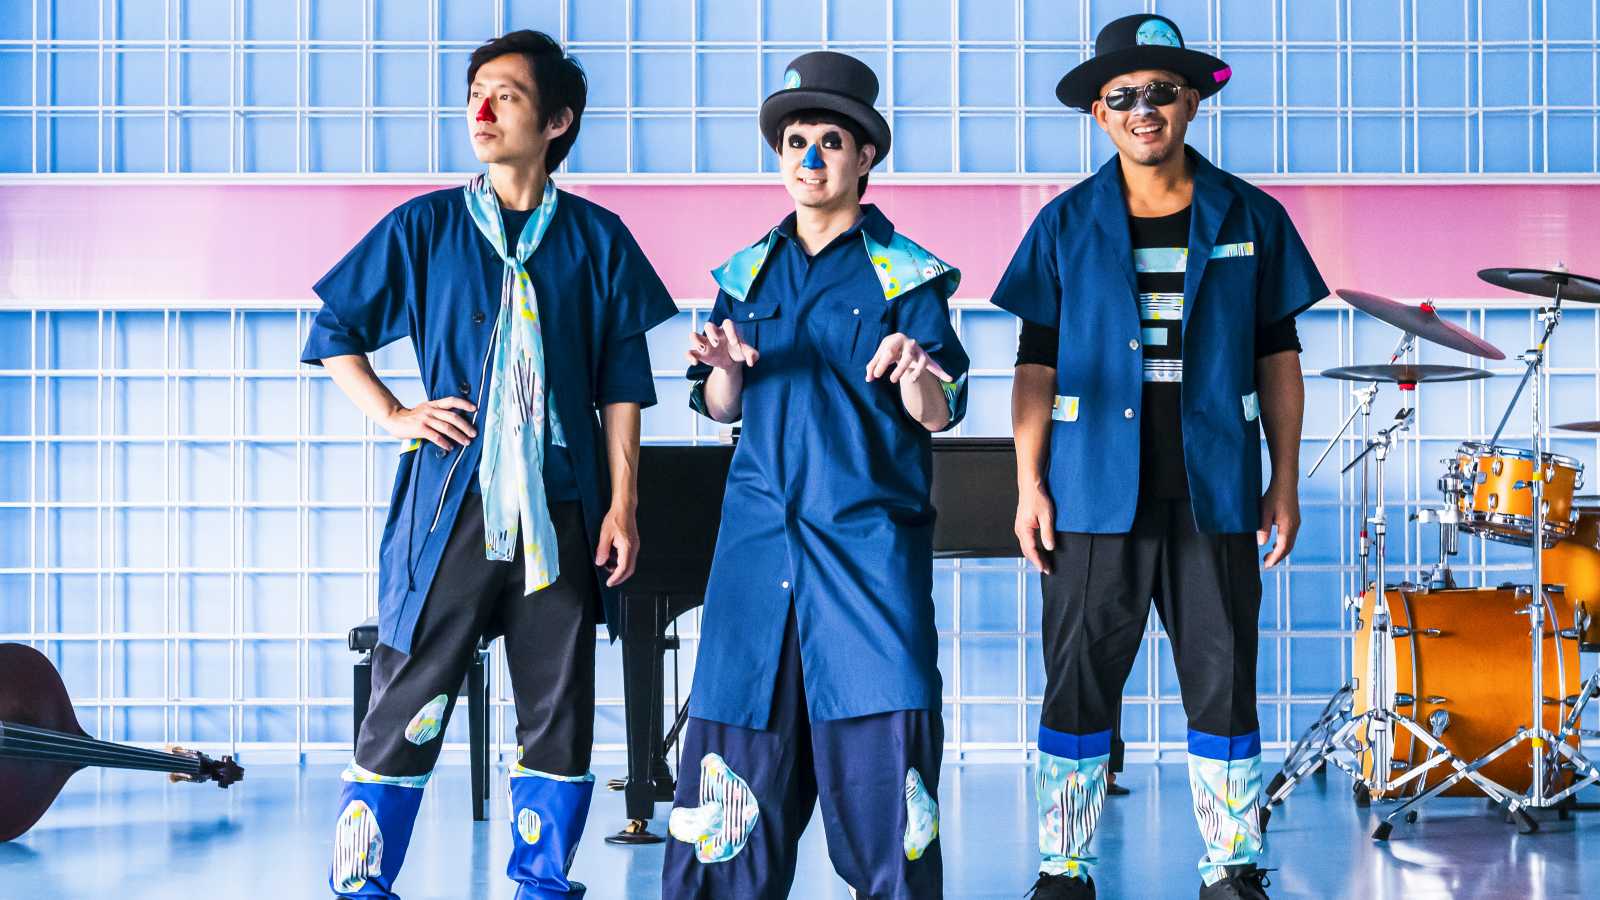 H ZETTRIO © World Apart Co., Ltd. All rights reserved.